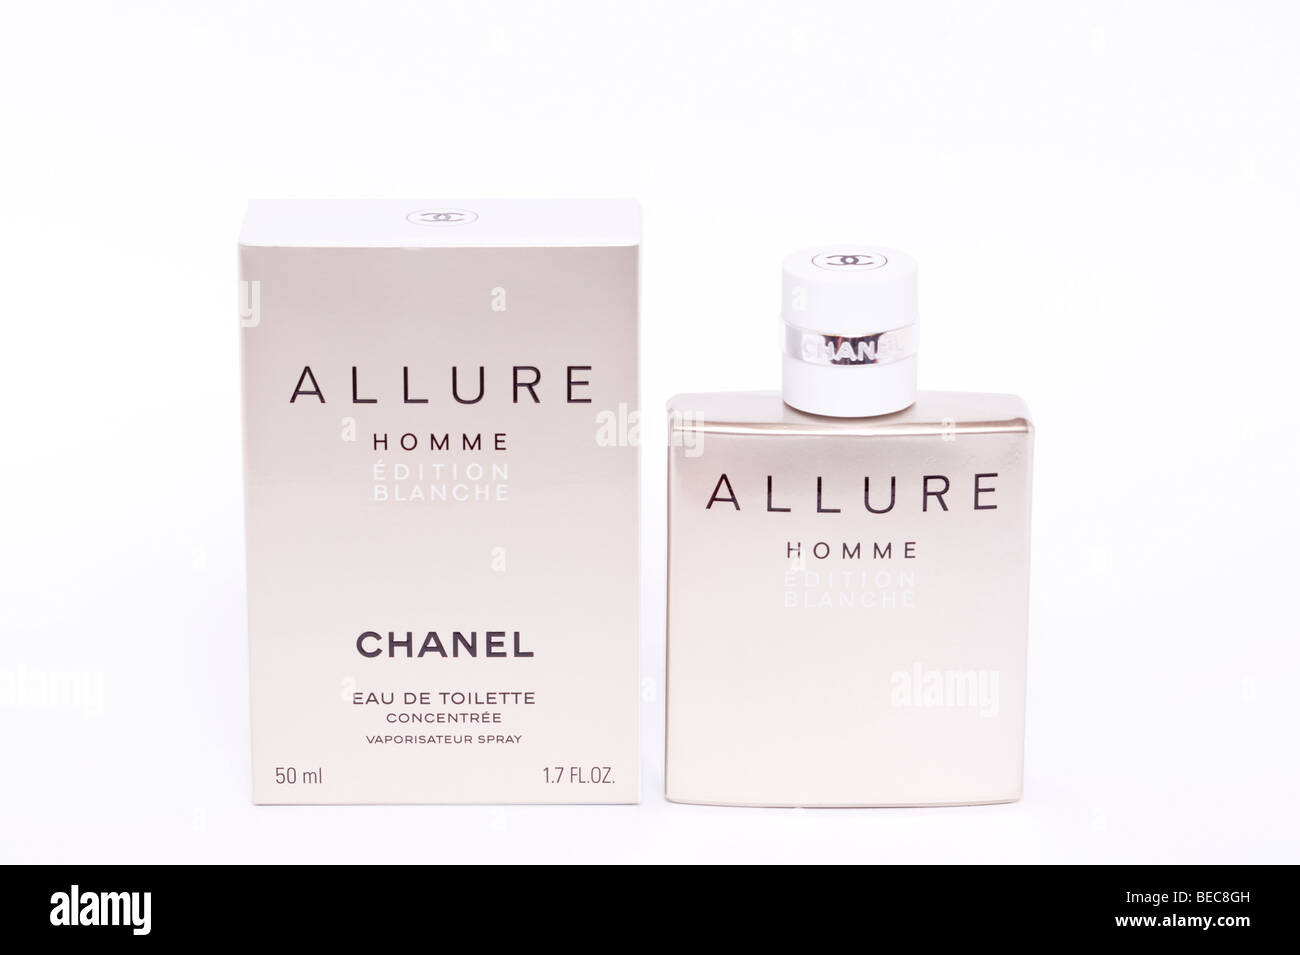 A bottle of Chanel Allure after shave for men with box on a white